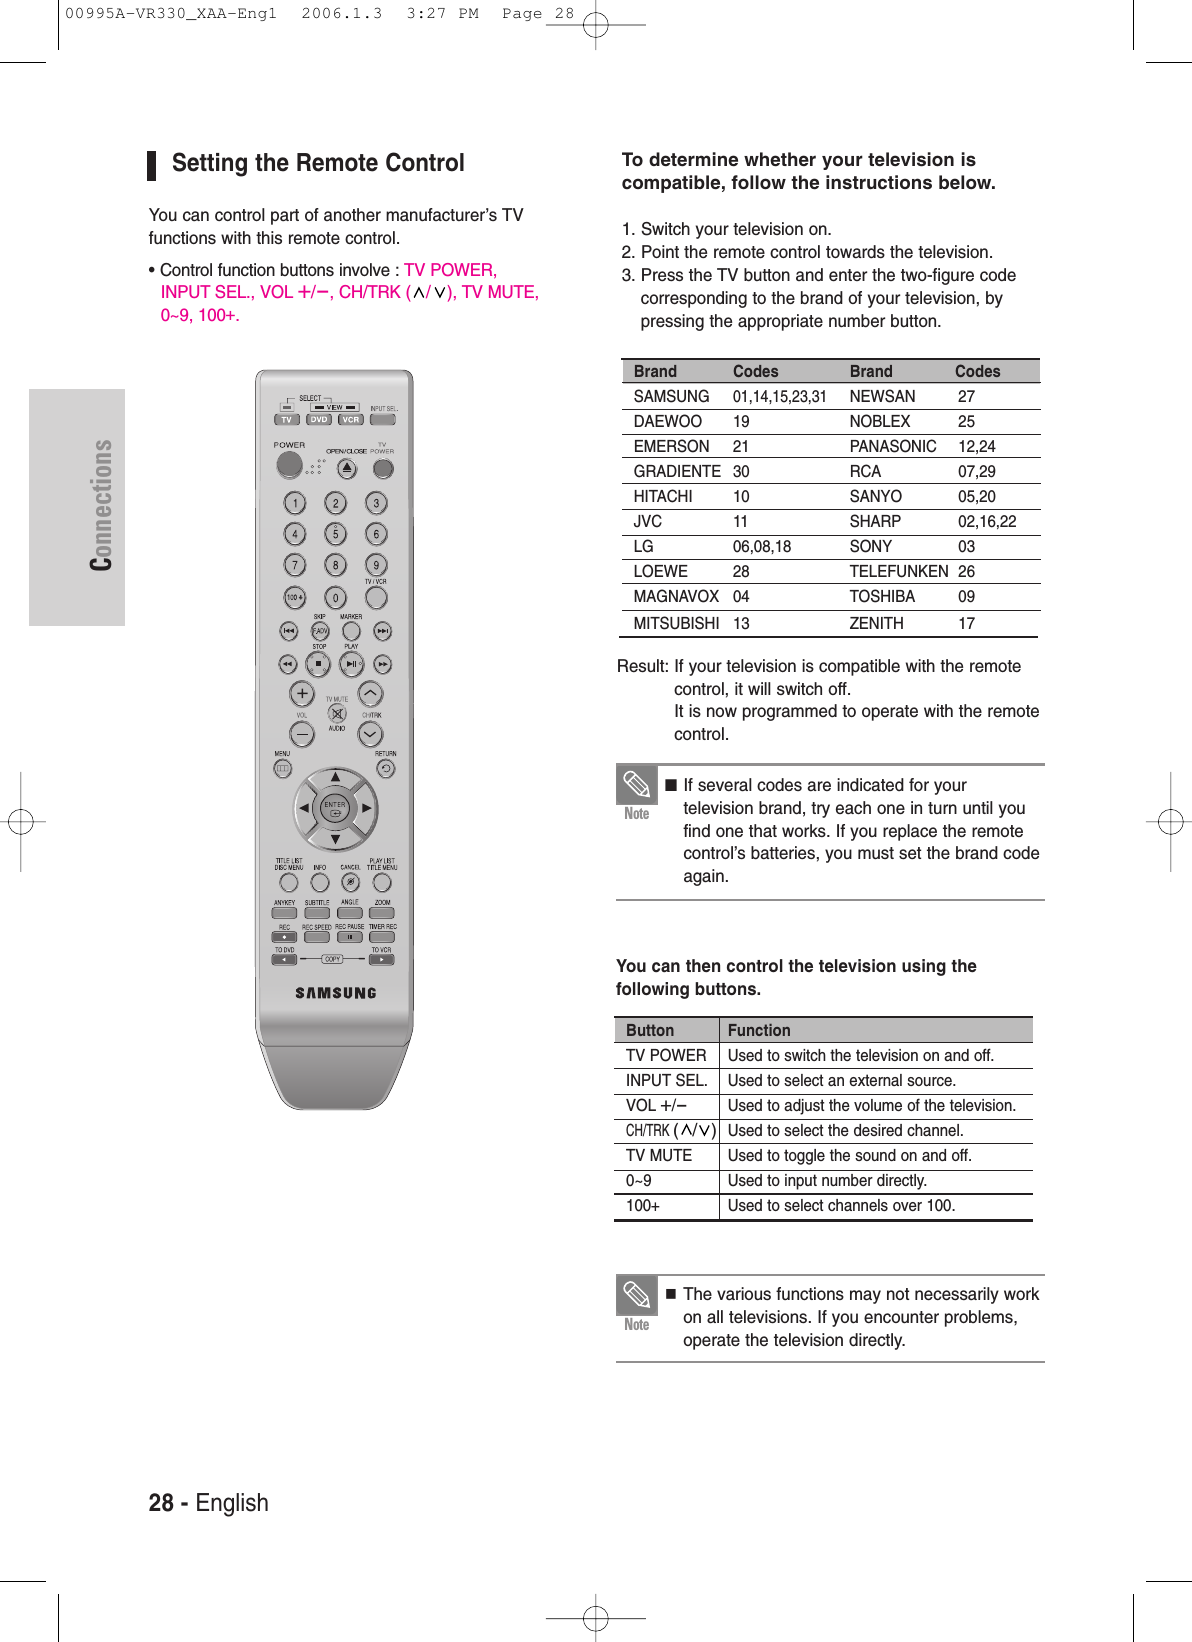 28 - EnglishConnectionsTo determine whether your television is compatible, follow the instructions below.1. Switch your television on.2. Point the remote control towards the television.3. Press the TV button and enter the two-figure codecorresponding to the brand of your television, bypressing the appropriate number button.Result: If your television is compatible with the remotecontrol, it will switch off.It is now programmed to operate with the remotecontrol.You can then control the television using the following buttons.Brand Codes SAMSUNG01,14,15,23,31DAEWOO 19EMERSON 21GRADIENTE 30HITACHI 10JVC 11LG 06,08,18LOEWE 28MAGNAVOX 04MITSUBISHI 13Brand CodesNEWSAN 27NOBLEX 25PANASONIC 12,24RCA 07,29SANYO 05,20SHARP 02,16,22SONY 03TELEFUNKEN 26TOSHIBA 09ZENITH 17Button FunctionTV POWER Used to switch the television on and off.INPUT SEL. Used to select an external source.VOL+/-Used to adjust the volume of the television.CH/TRK (/)Used to select the desired channel.TV MUTE Used to toggle the sound on and off.0~9 Used to input number directly.100+ Used to select channels over 100.■ If several codes are indicated for your television brand, try each one in turn until youfind one that works. If you replace the remotecontrol’s batteries, you must set the brand codeagain.NoteThe various functions may not necessarily workon all televisions. If you encounter problems,operate the television directly.NoteSetting the Remote ControlYou can control part of another manufacturer’s TVfunctions with this remote control.• Control function buttons involve : TV POWER, INPUT SEL., VOL+/-, CH/TRK ( / ), TV MUTE,0~9, 100+.  00995A-VR330_XAA-Eng1  2006.1.3  3:27 PM  Page 28